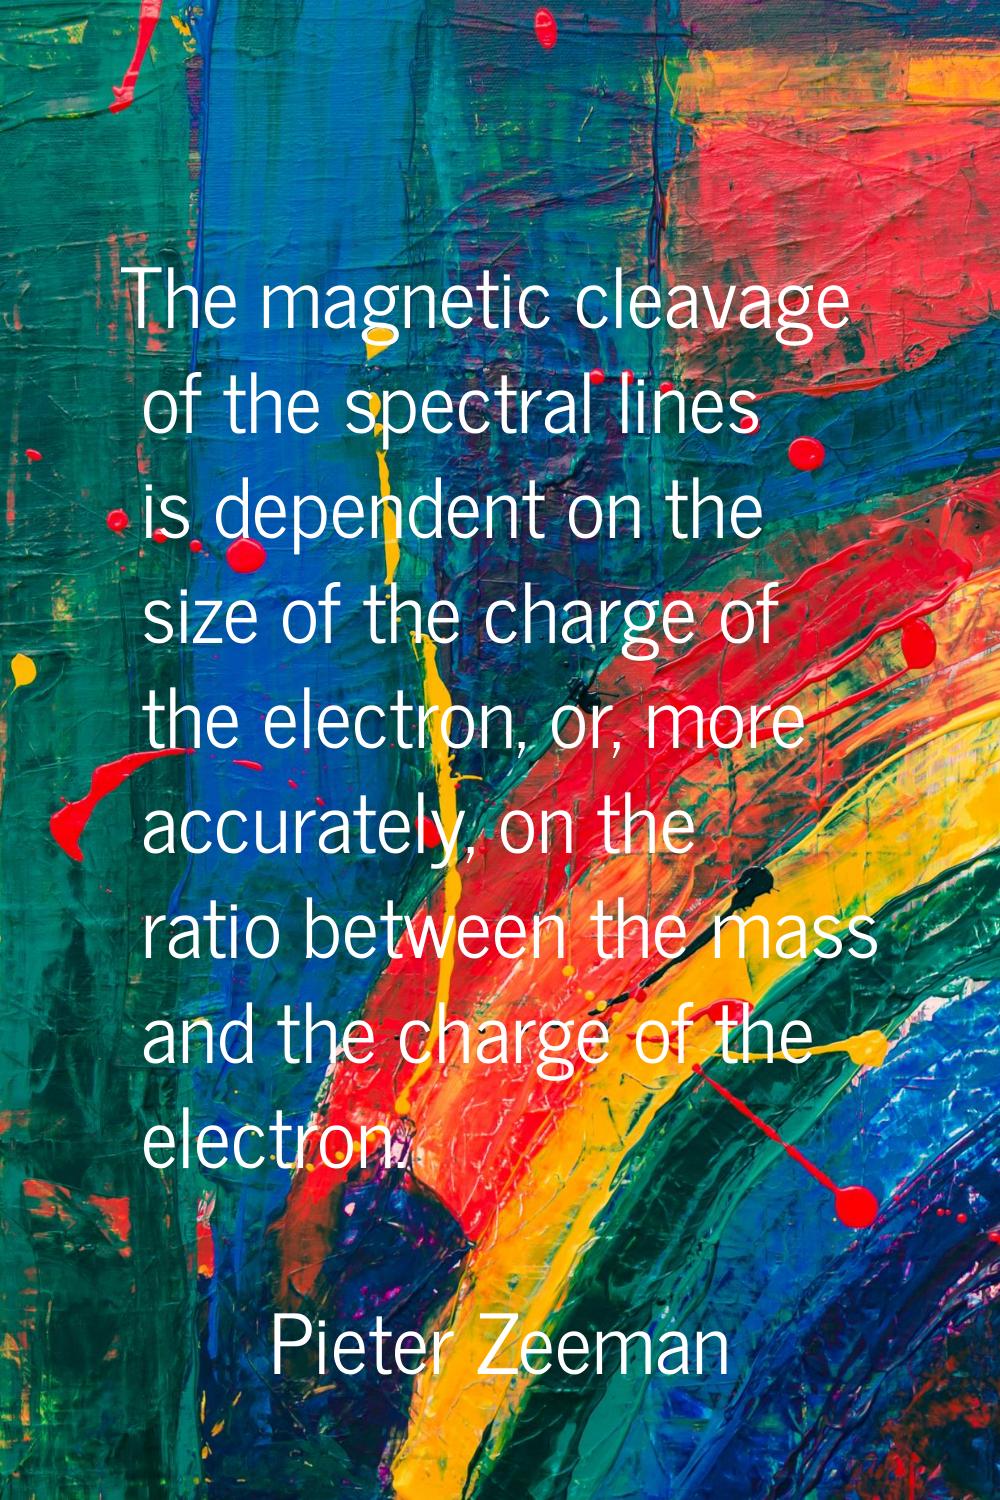 The magnetic cleavage of the spectral lines is dependent on the size of the charge of the electron,